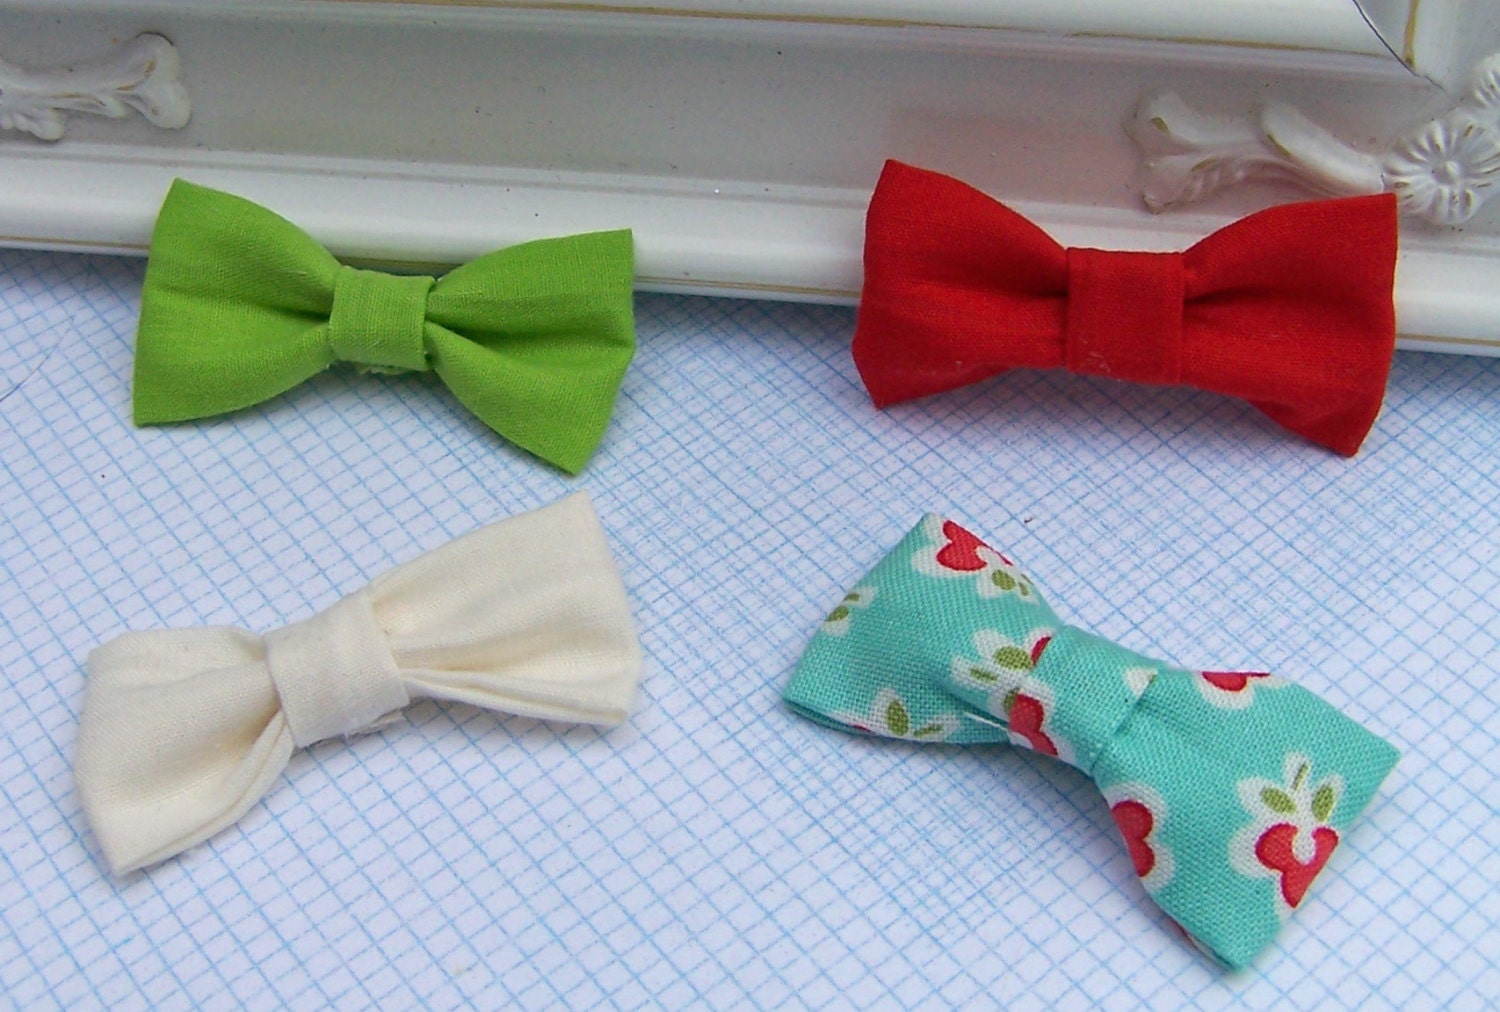 Set of 4 Shabby Chic Mini Fabric Bows - Red, White, Floral Print, Green